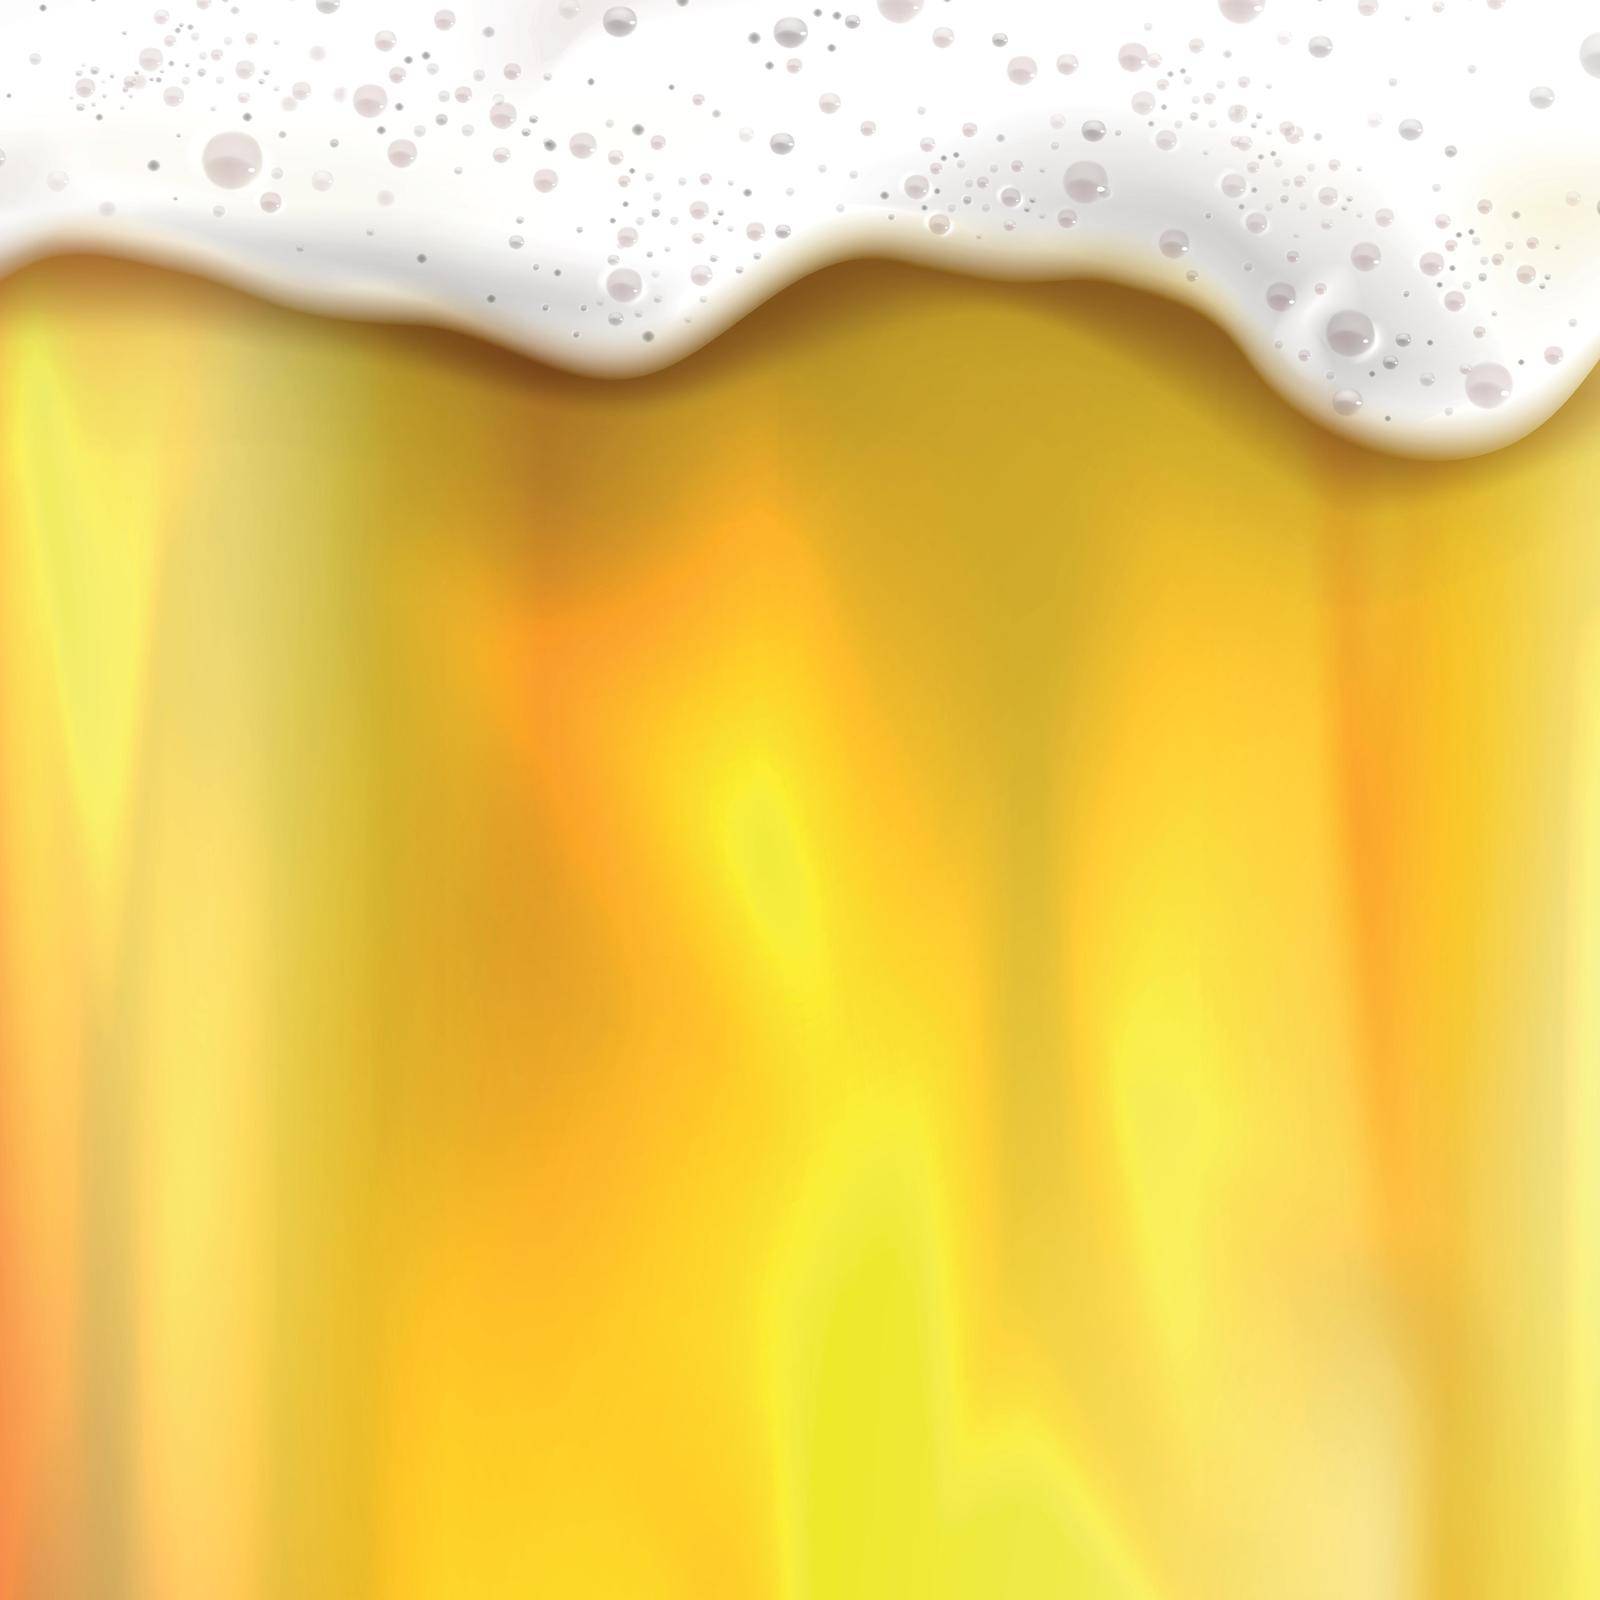 Realistic beer background, foamy drink, dripping drops - Vector illustration